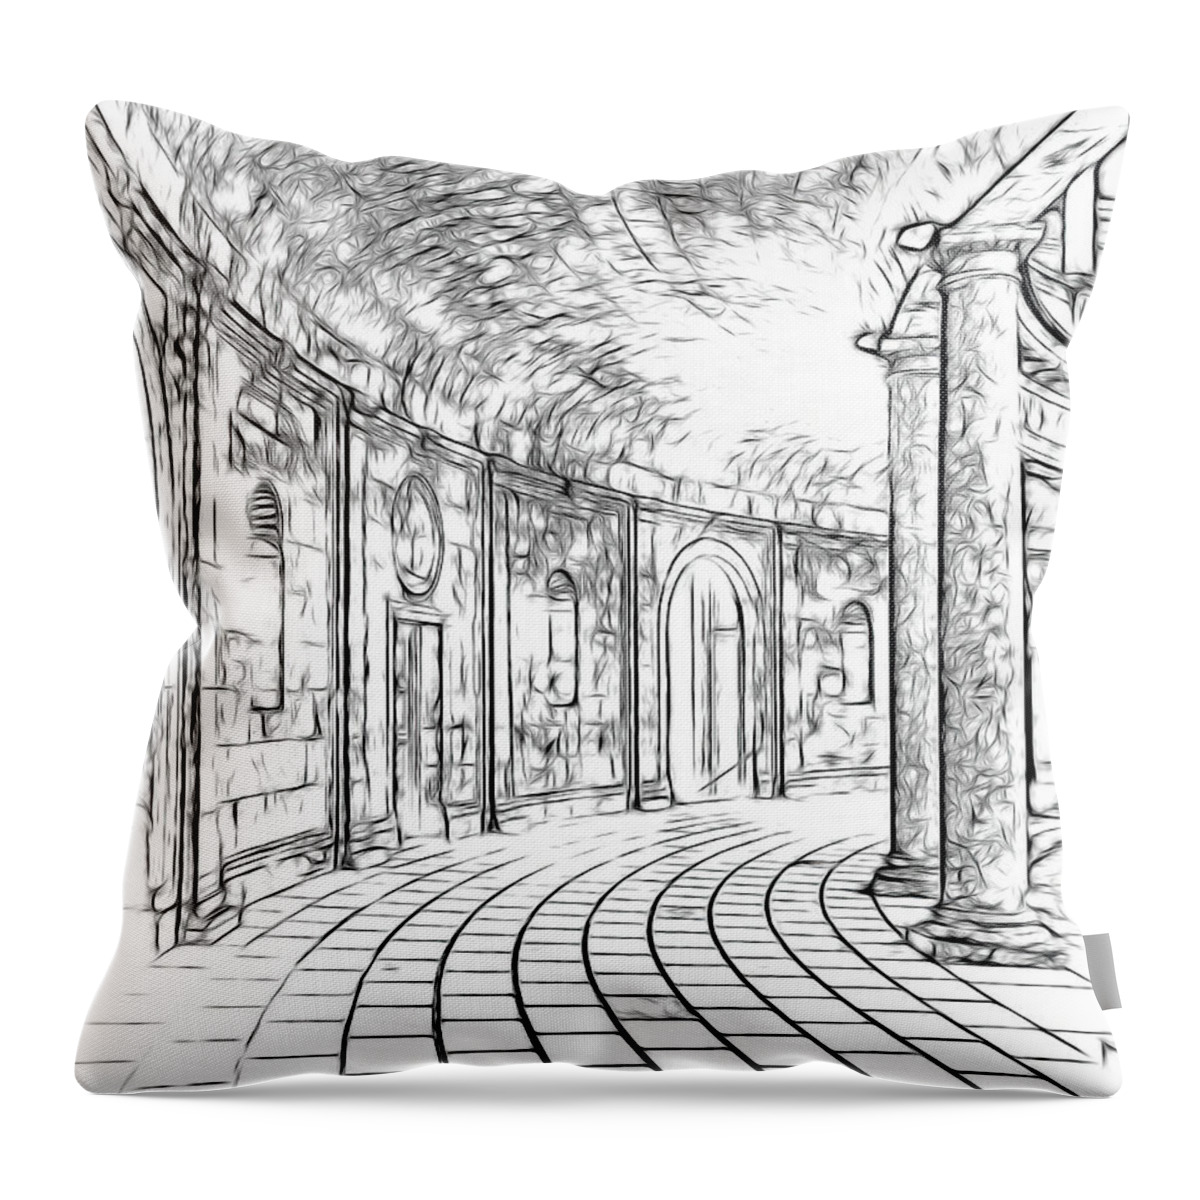 Alhambra Throw Pillow featuring the drawing Alhambra Palace Corridor by Rebecca Herranen